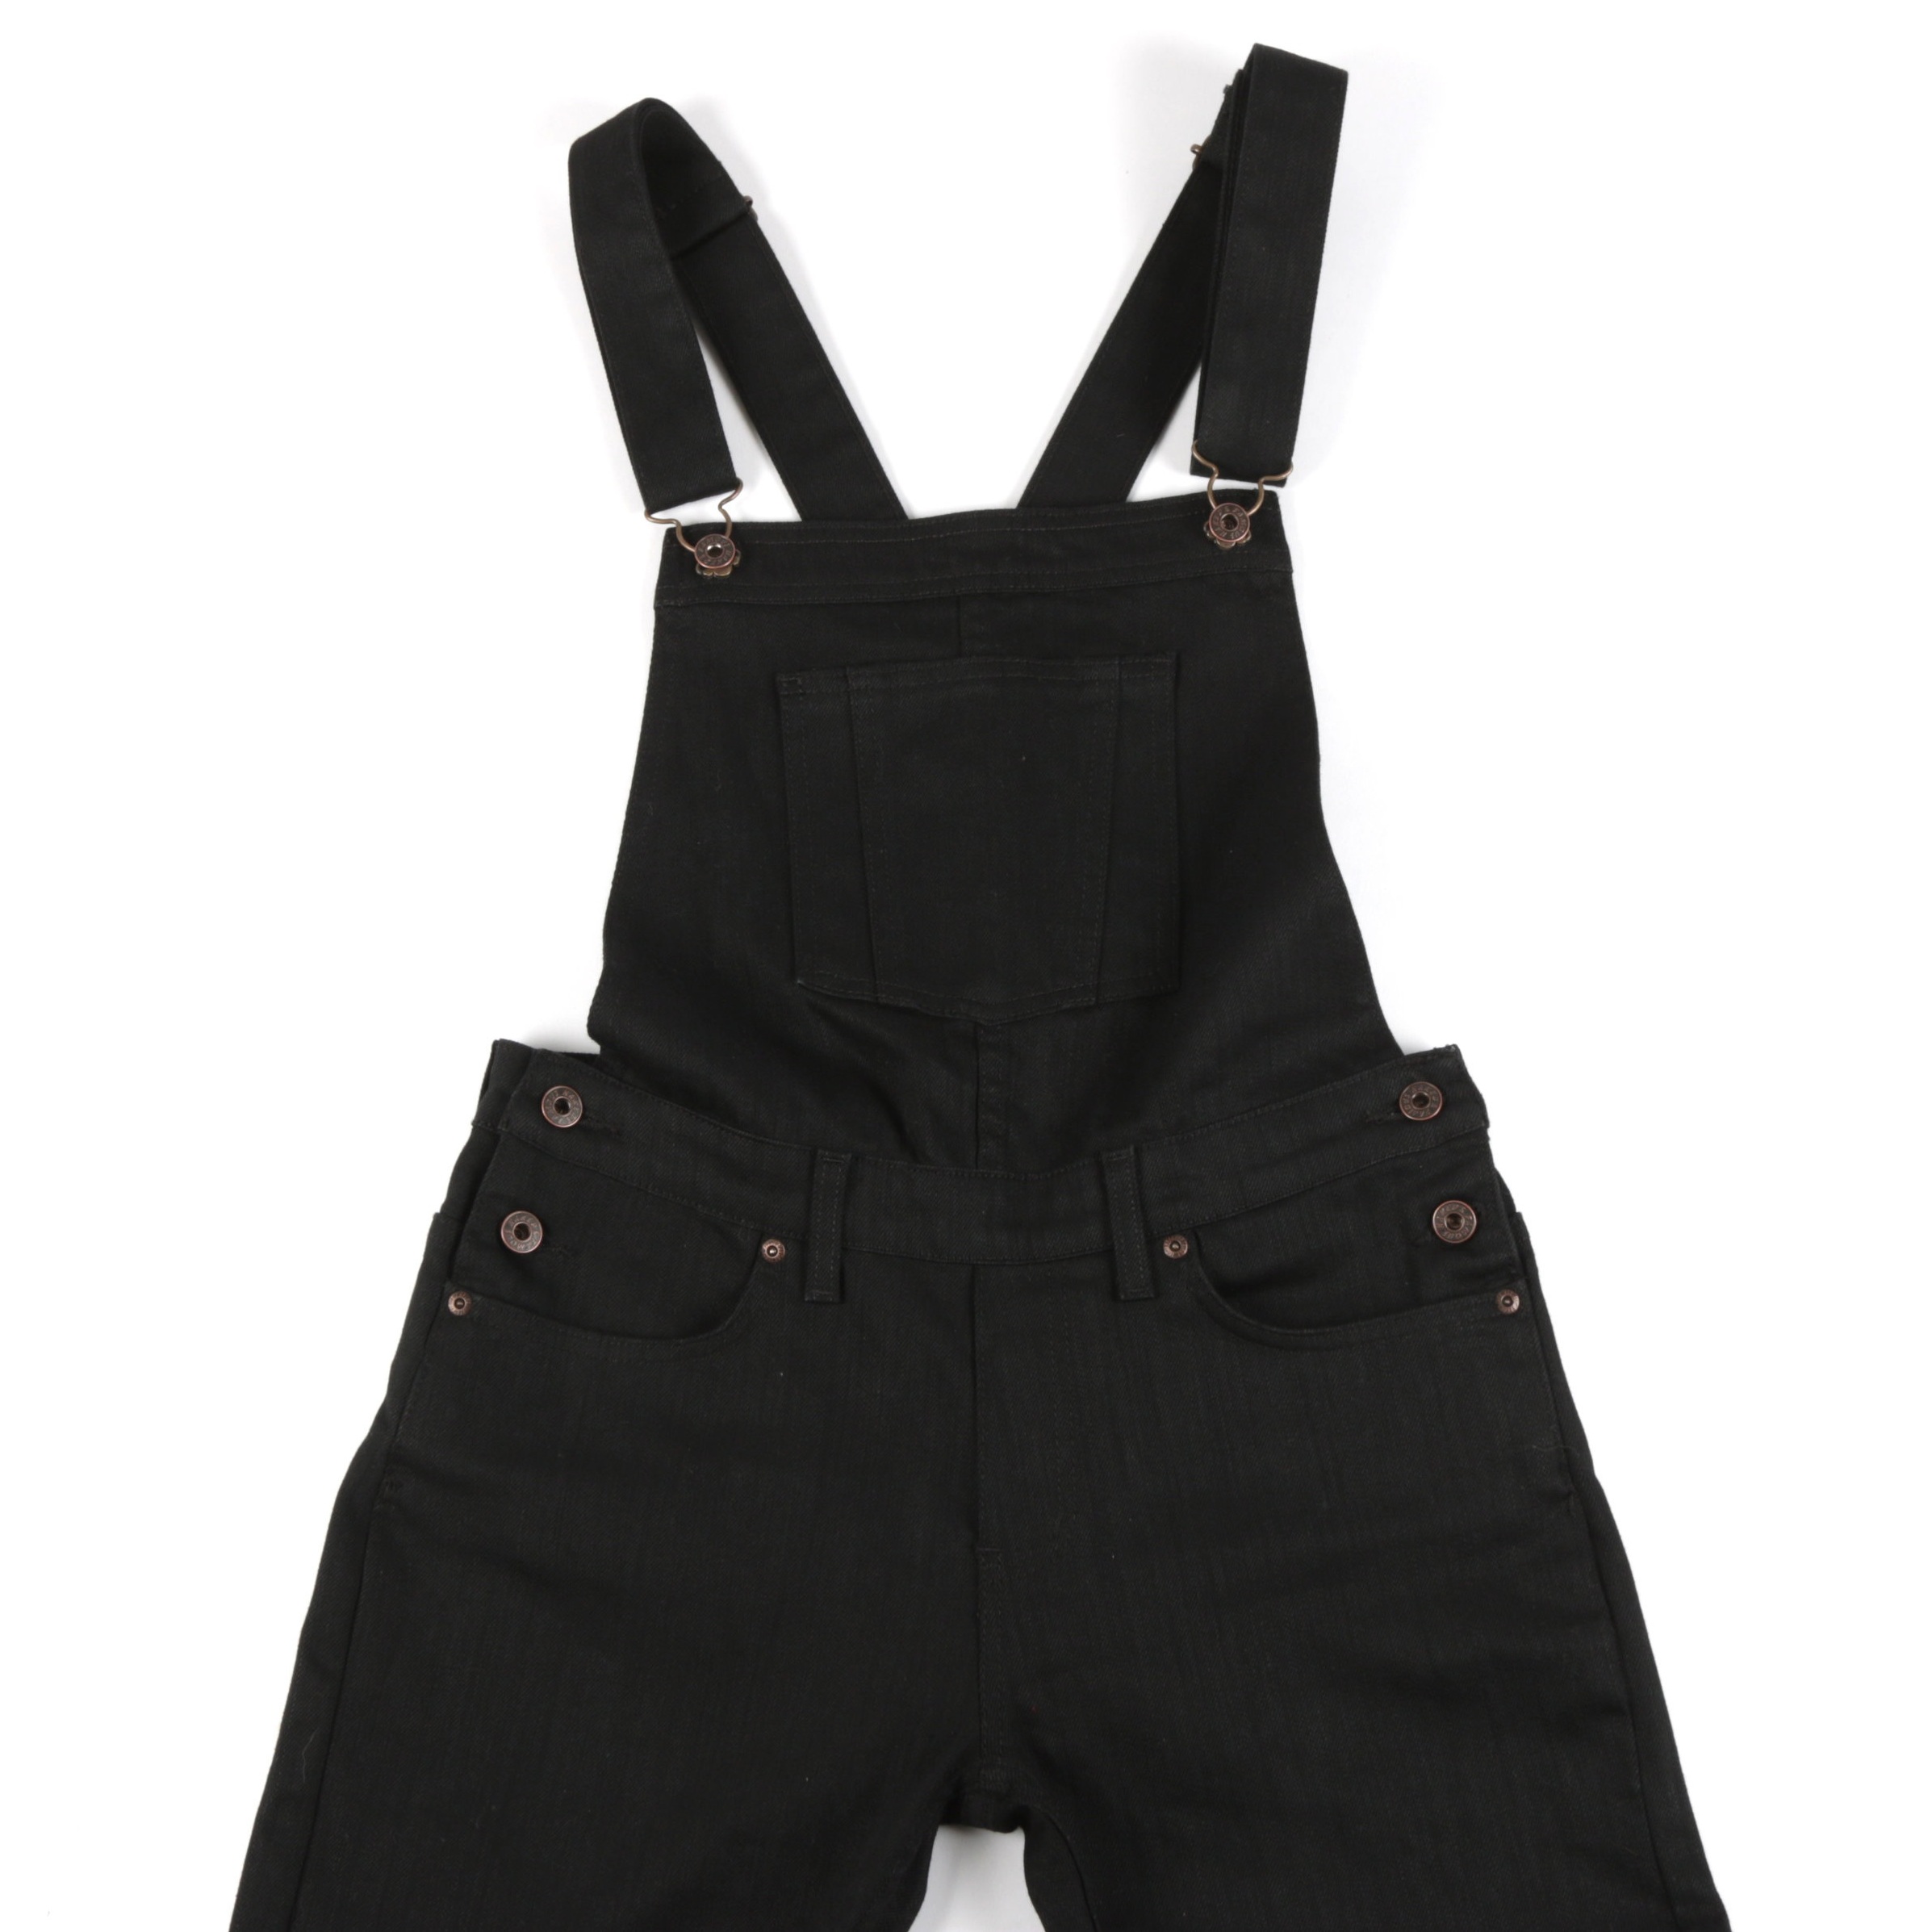  Women’s Overalls Black Power-Stretch Front View 